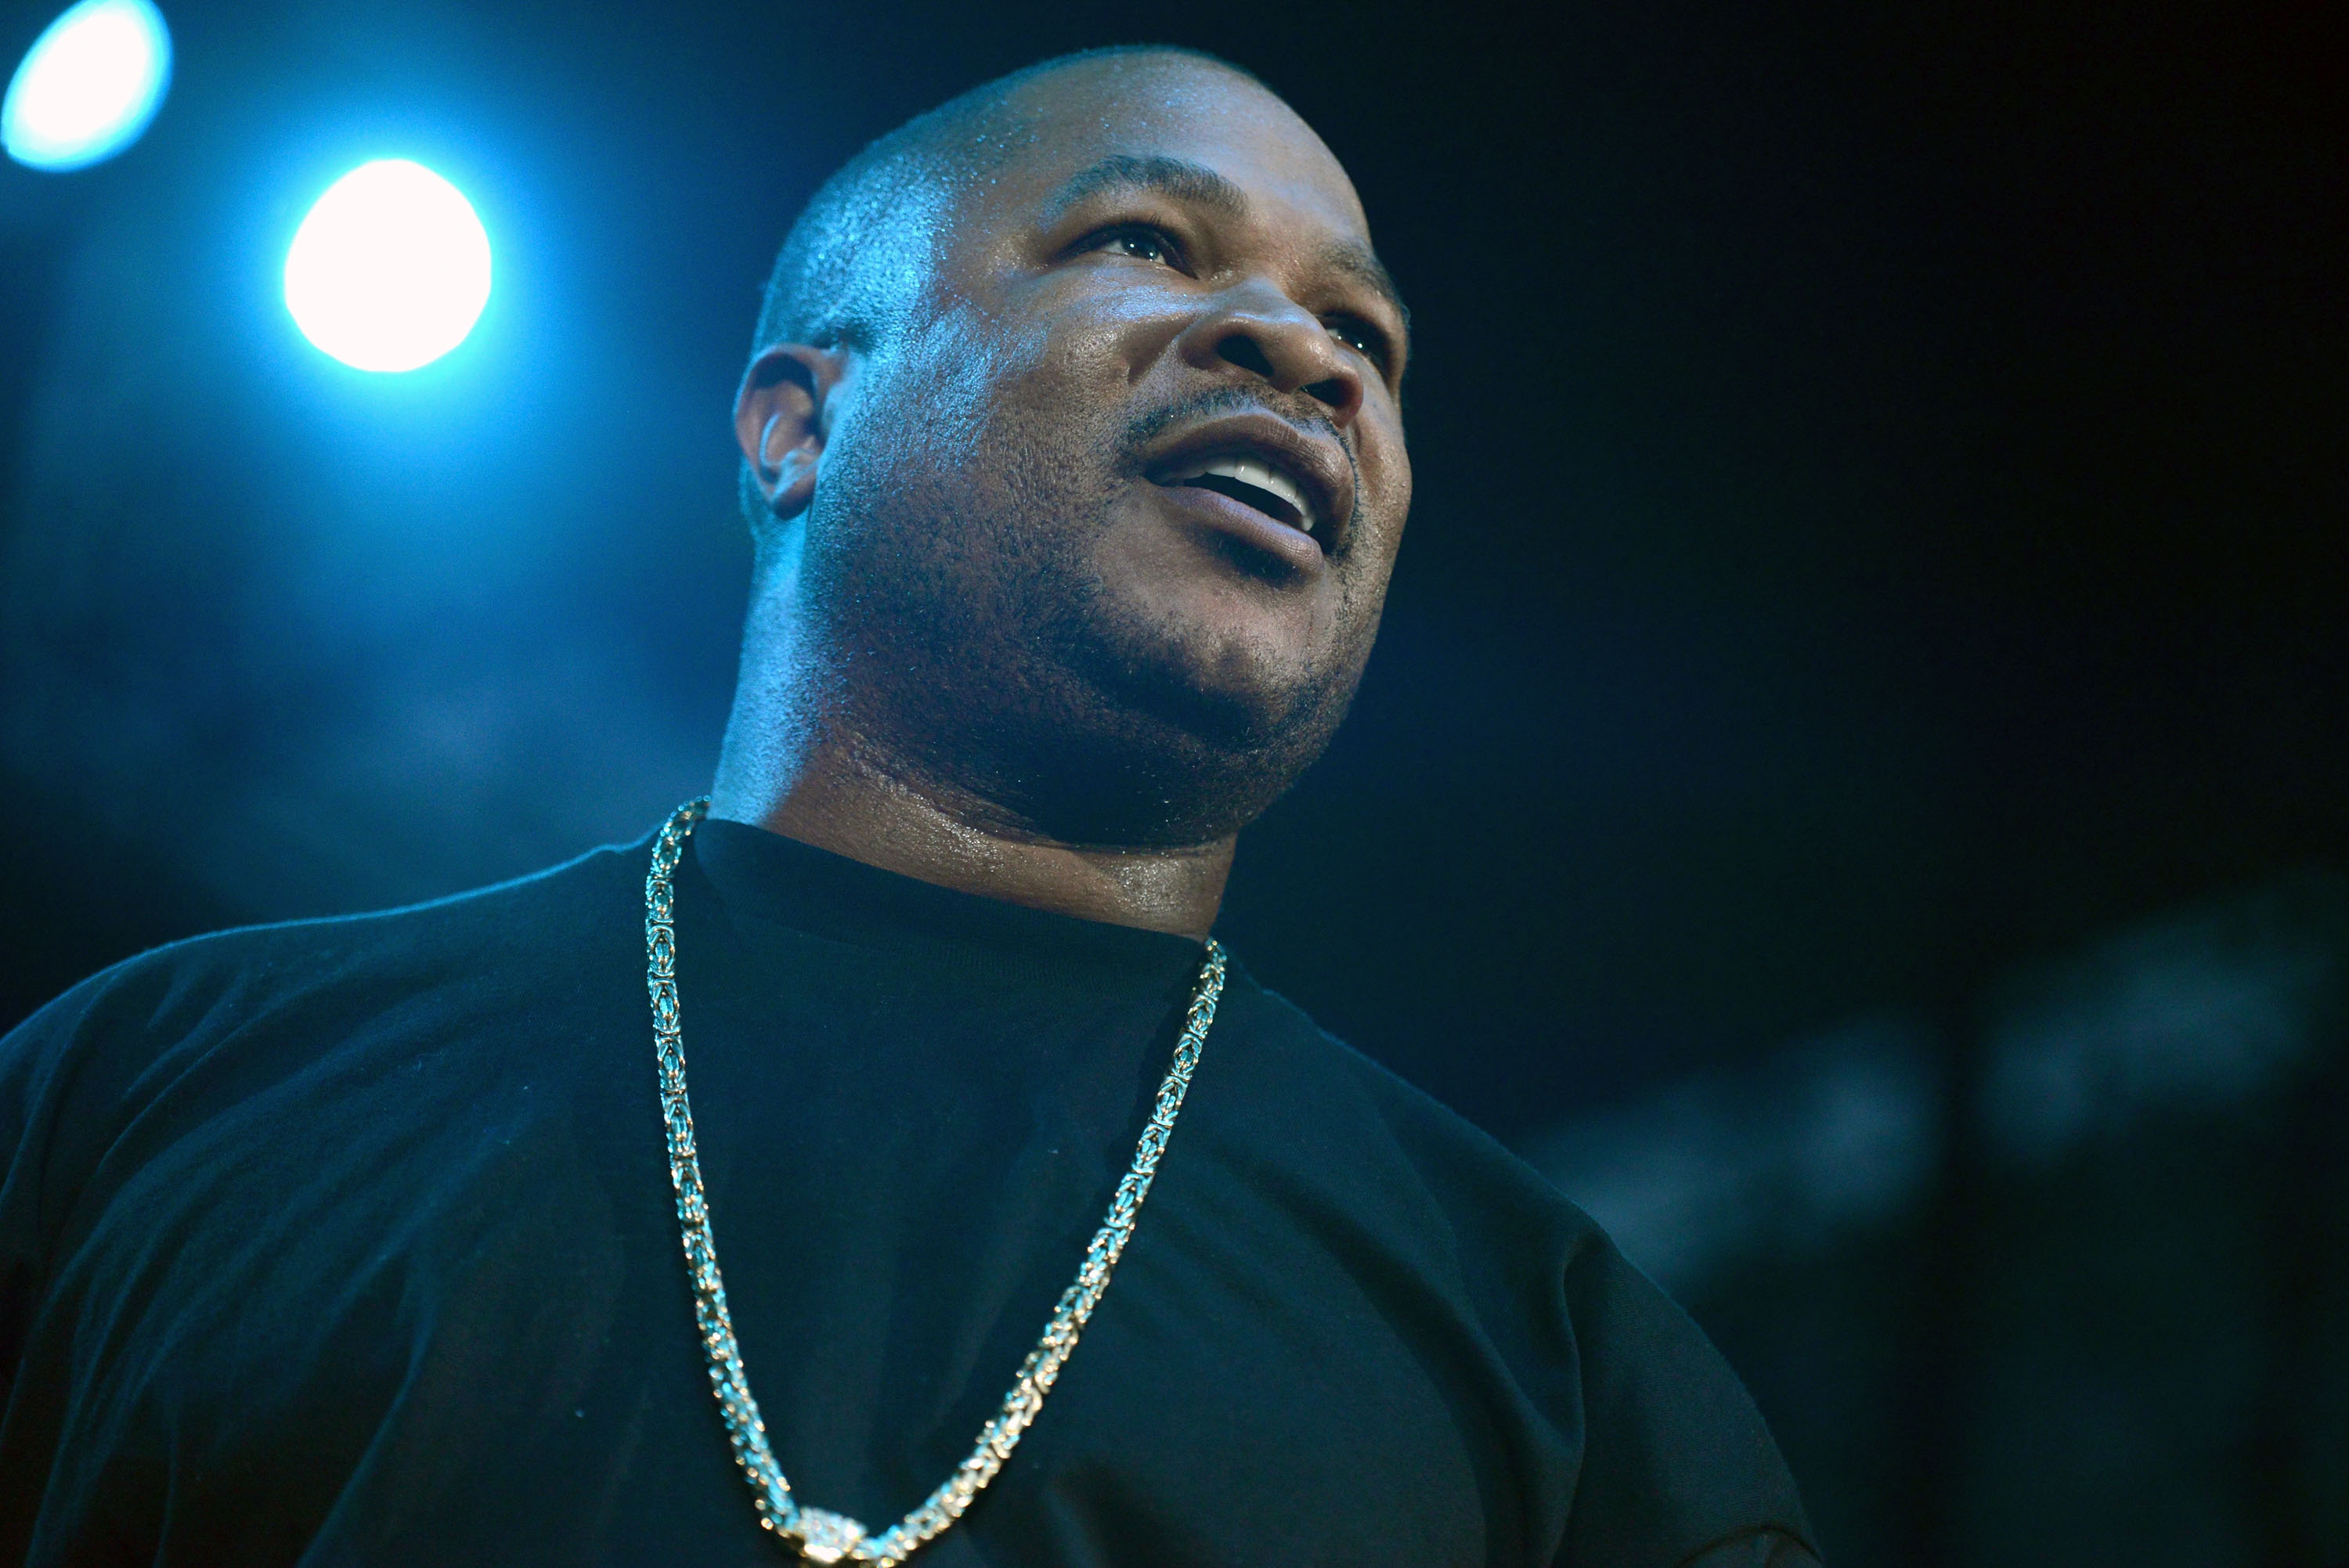 Xzibit Has Seen It All: “Restless,” “Up In Smoke Tour” Stories & Serial Killers